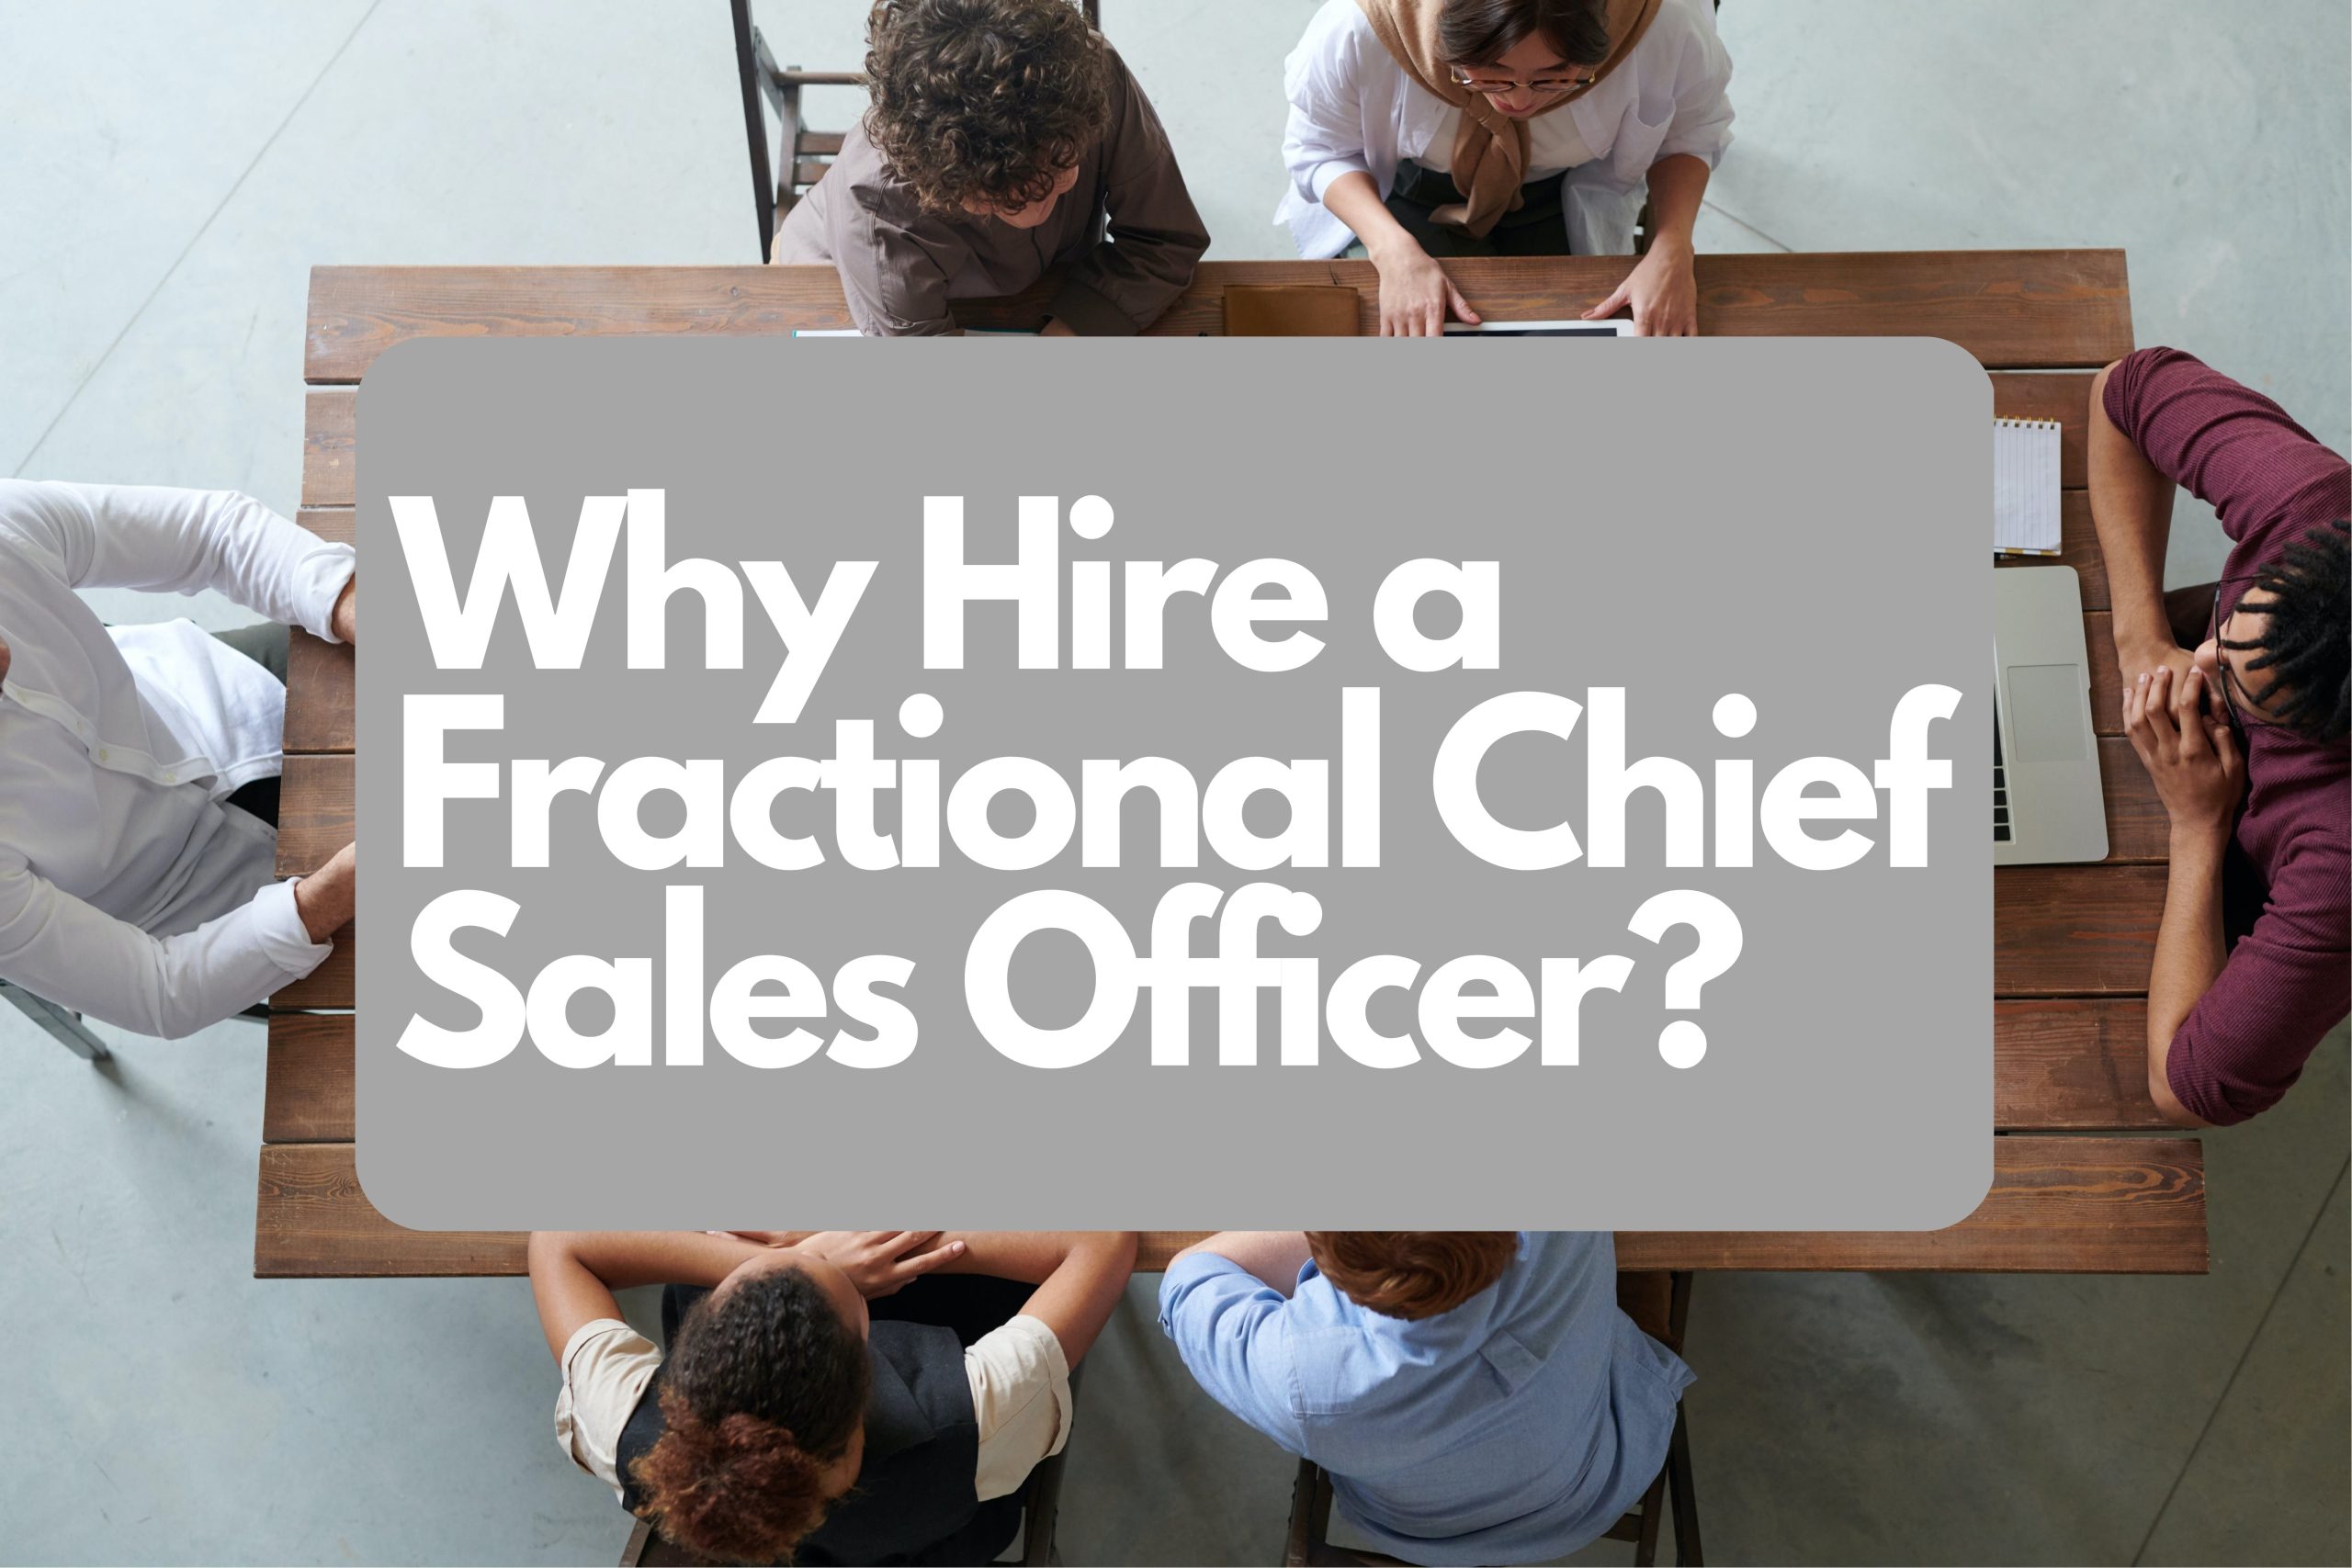 Why Hire a Fractional Chief Sales Officer?